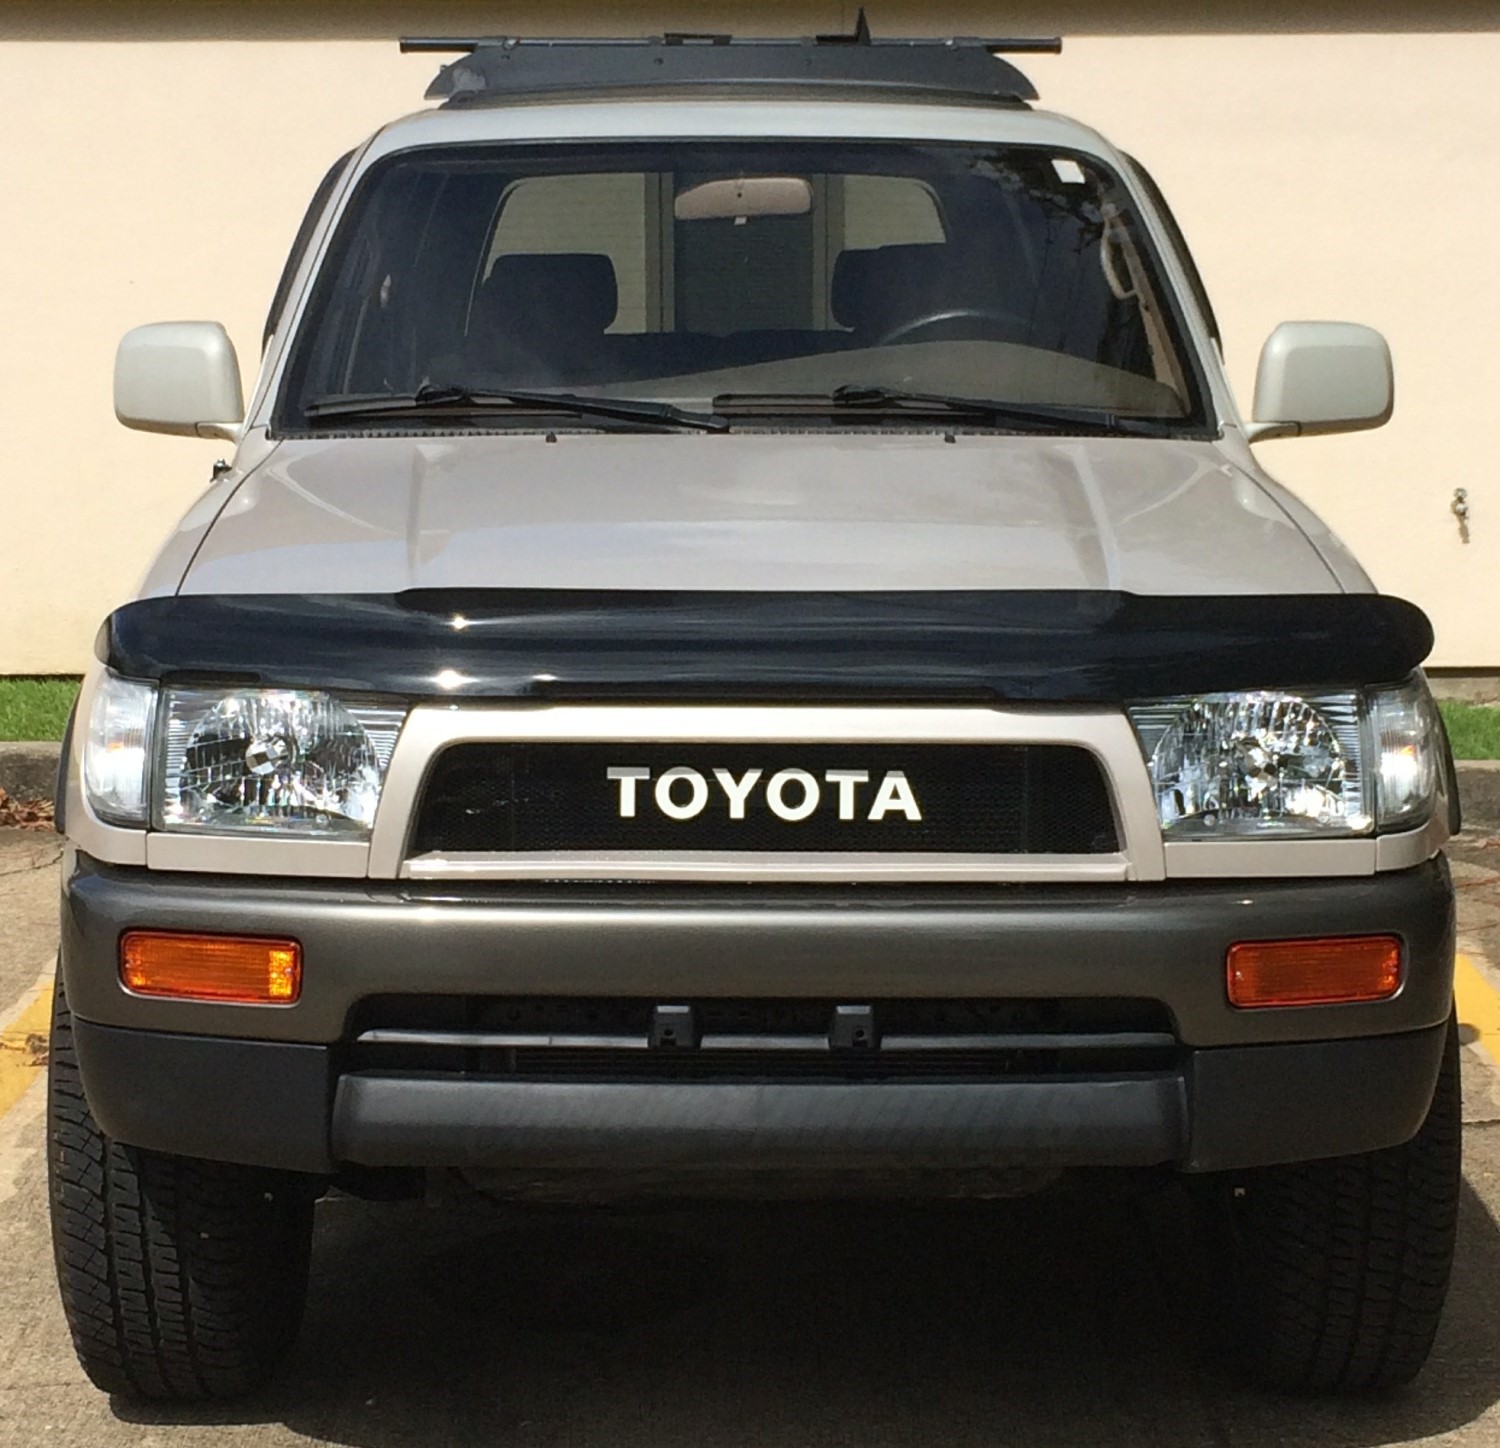 Revamp Your Ride: 3rd Gen Toyota 4Runner with Black Slotted Mesh Grille and Retro Toyota Emblem